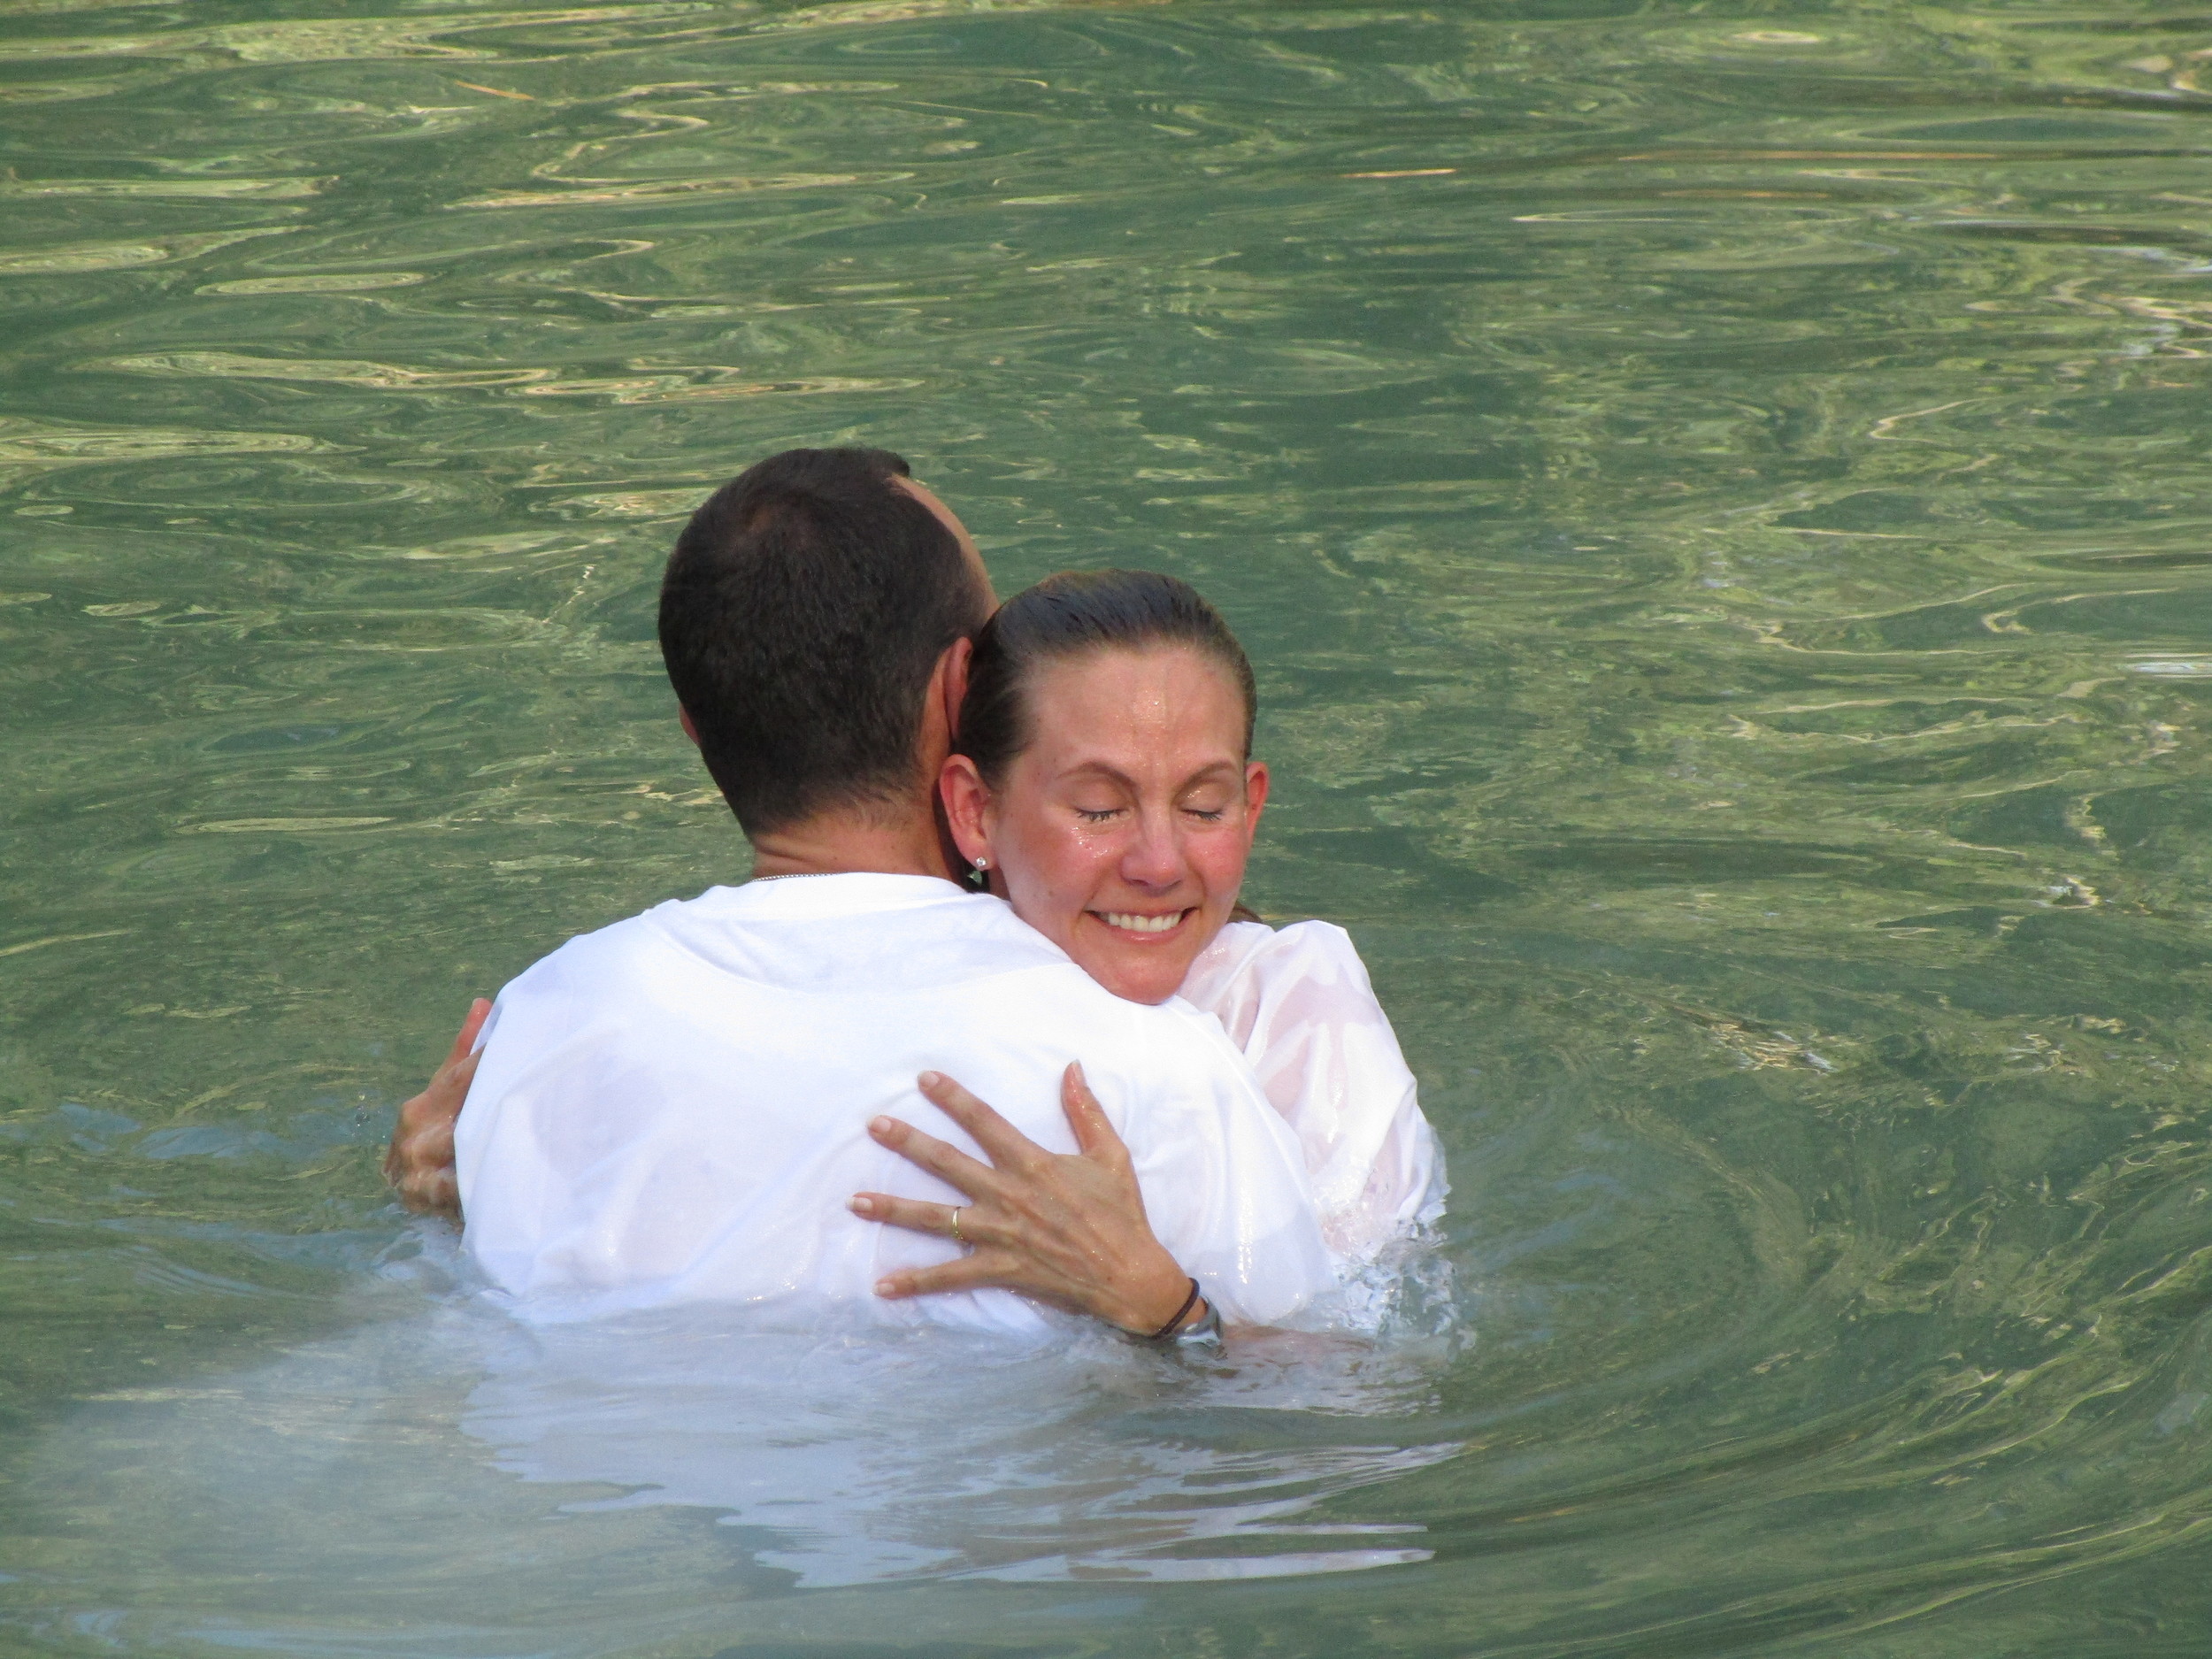  The love of my life and I baptizing each other in the Jordan River. Somewhere along this way Jesus met John the Baptist in the water. 